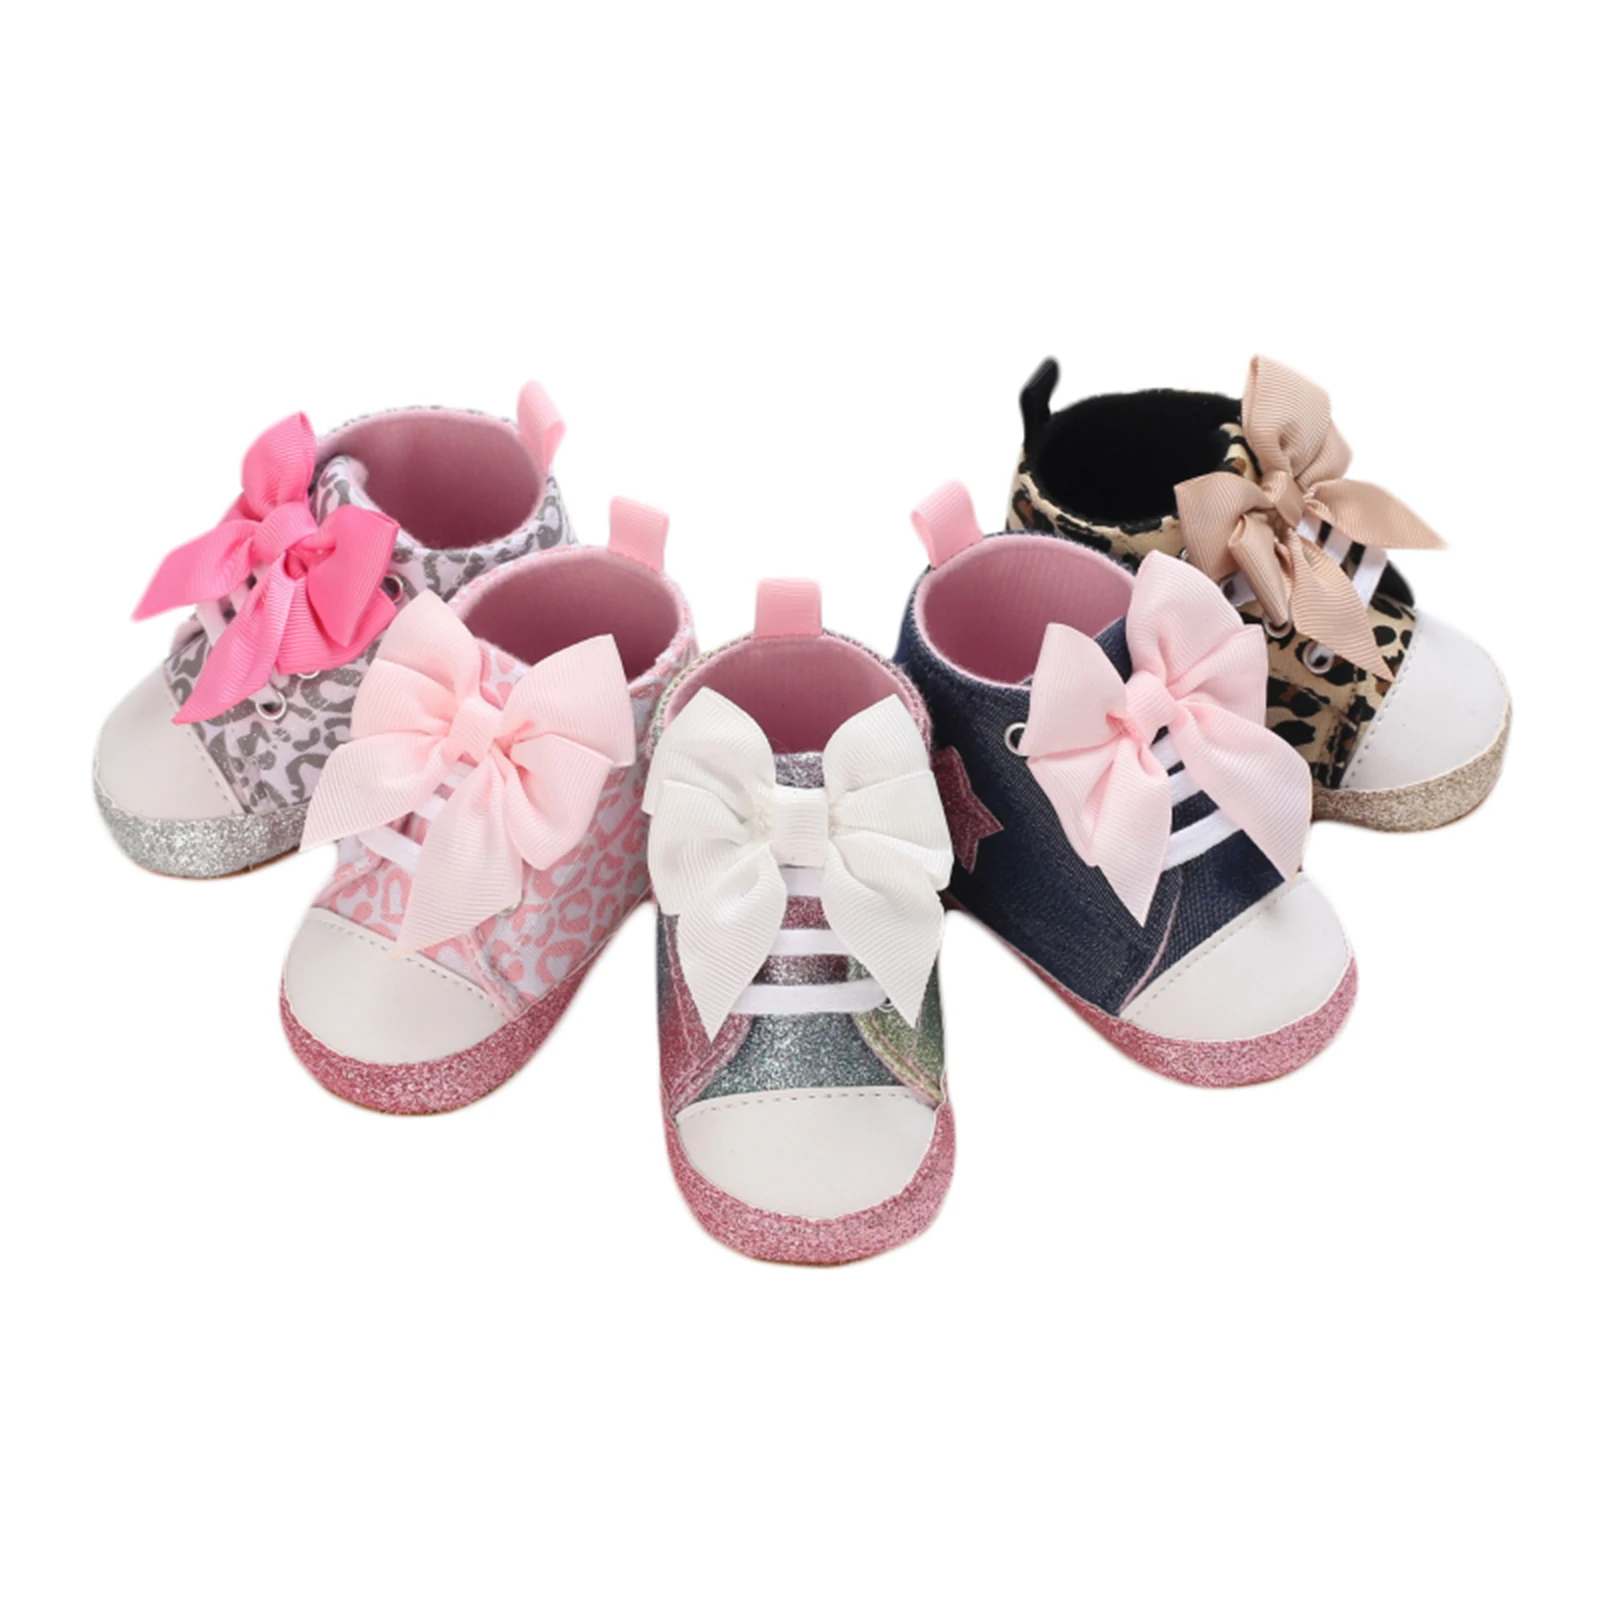 

Lioraitiin 0-12M Newborn Baby Girl Boys Shoes Leopard / Star Printed Bowknot Walking Soft-Soled First Walker Shoes